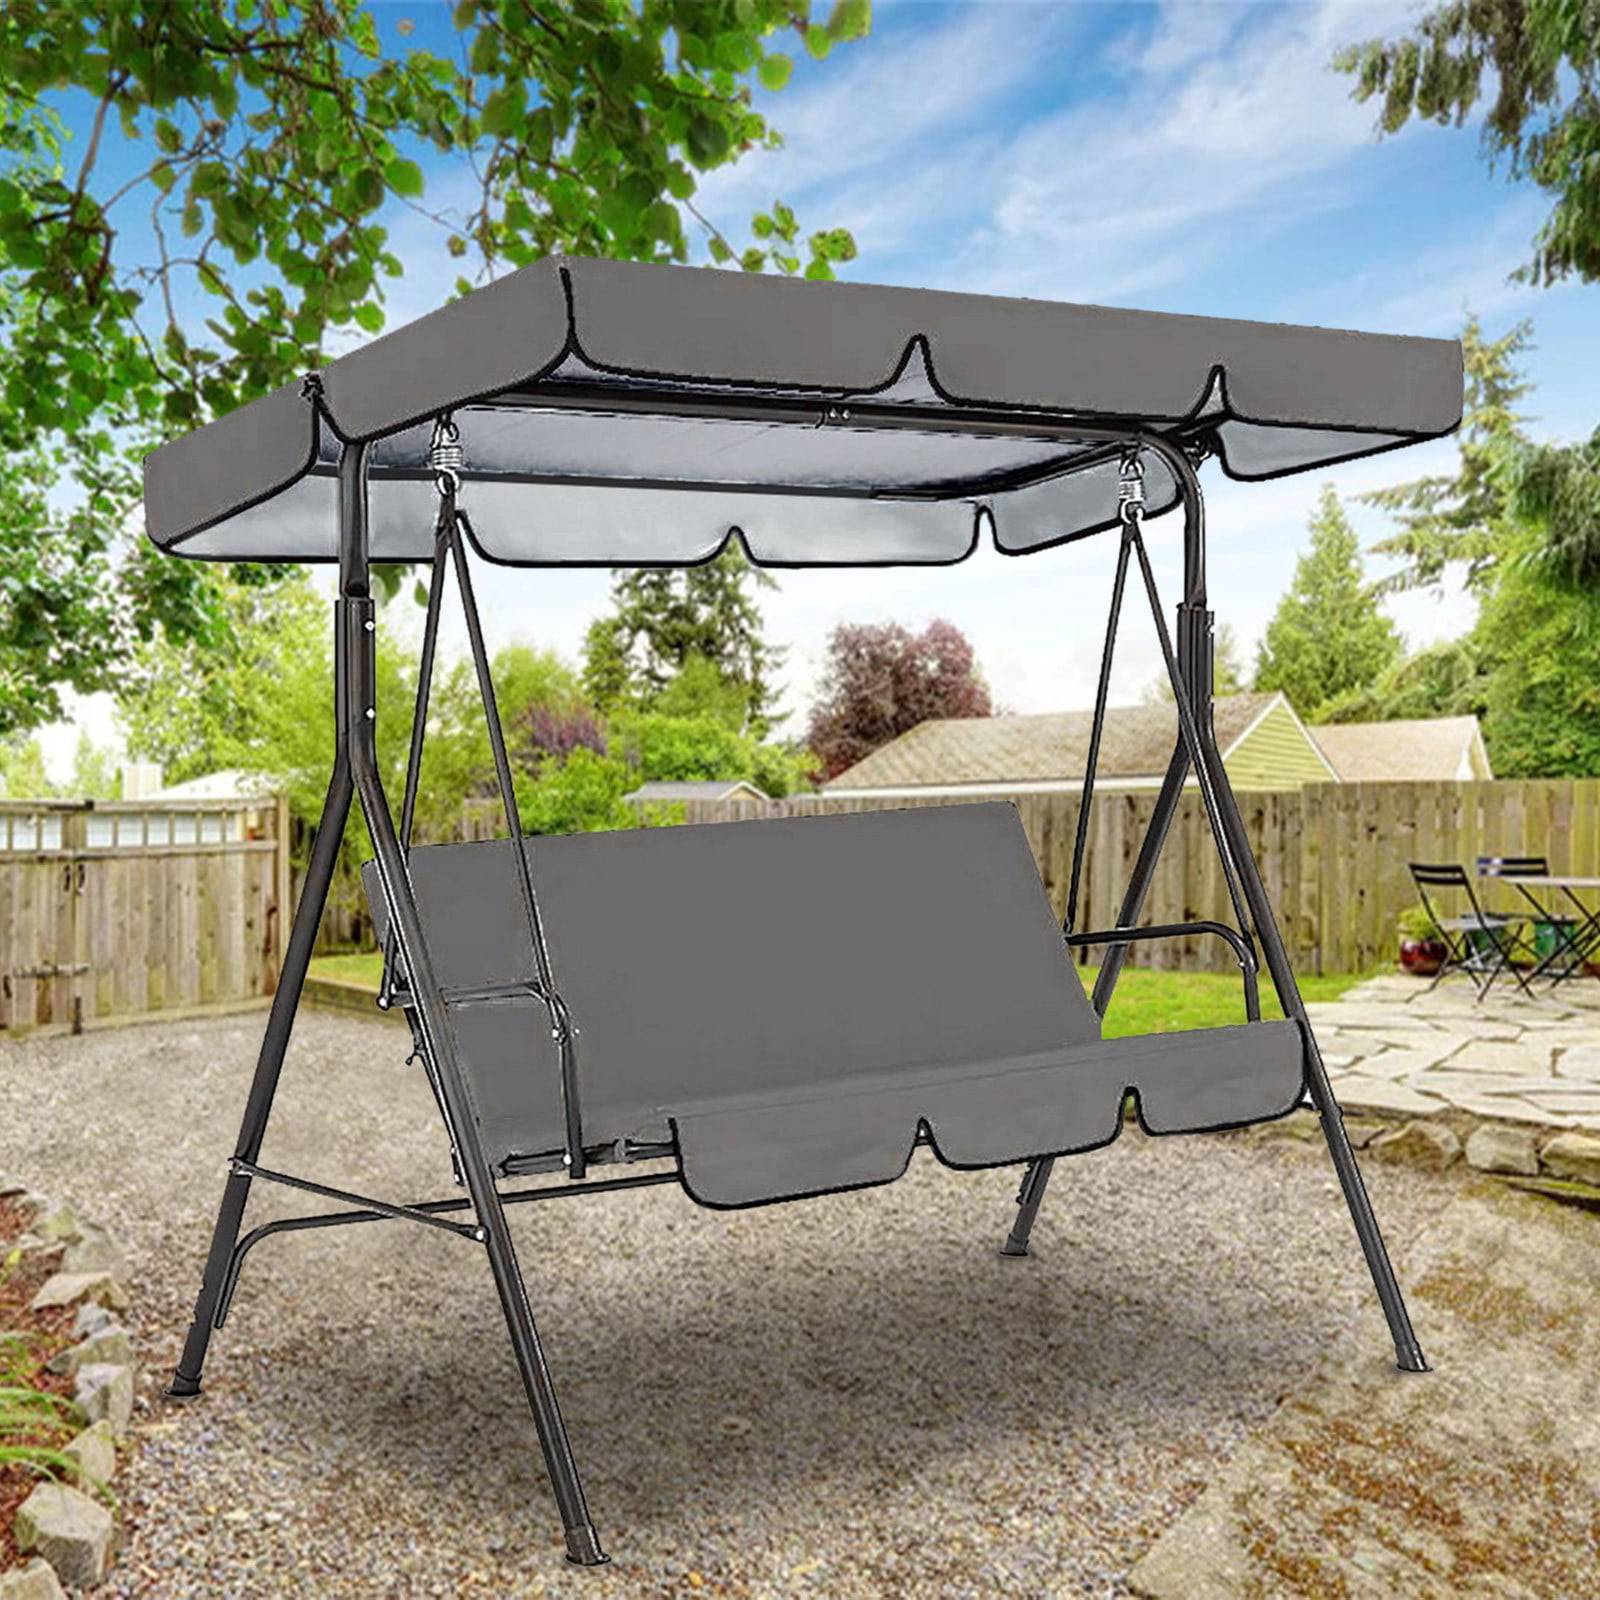 2 3 Seater Replacement Swing Canopy Cover,Waterproof Swing Canopy Outdoor Cover,UV Protection Patio Hammock Cover Swing Chair Top Cover Roof for Garden 